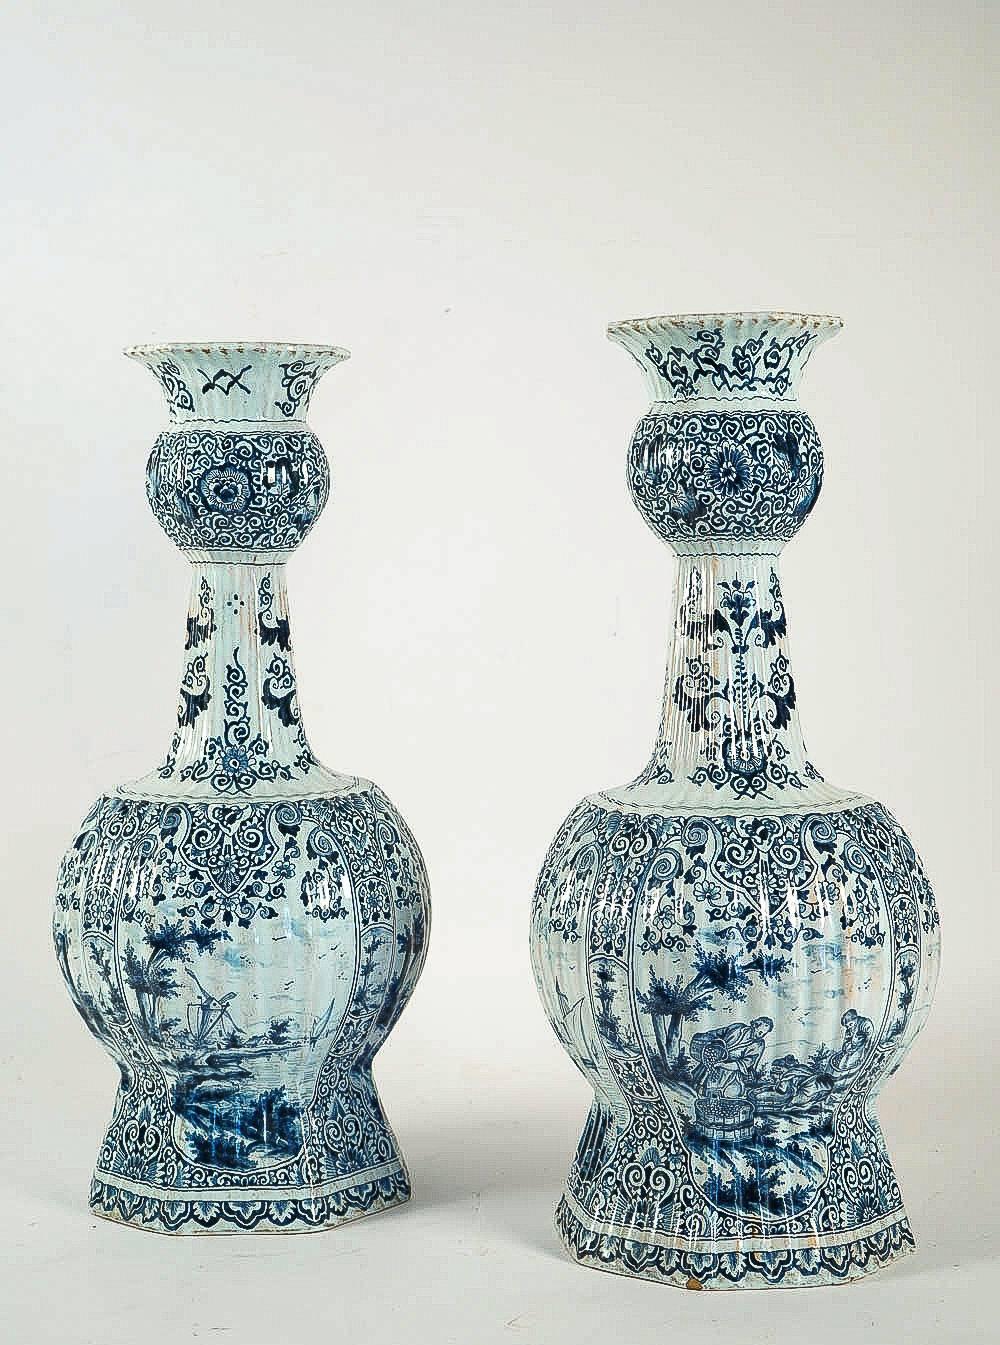 Dutch Early 19th Century, Monumental Delft Faience Pair of Gourd-Shaped Vases 9